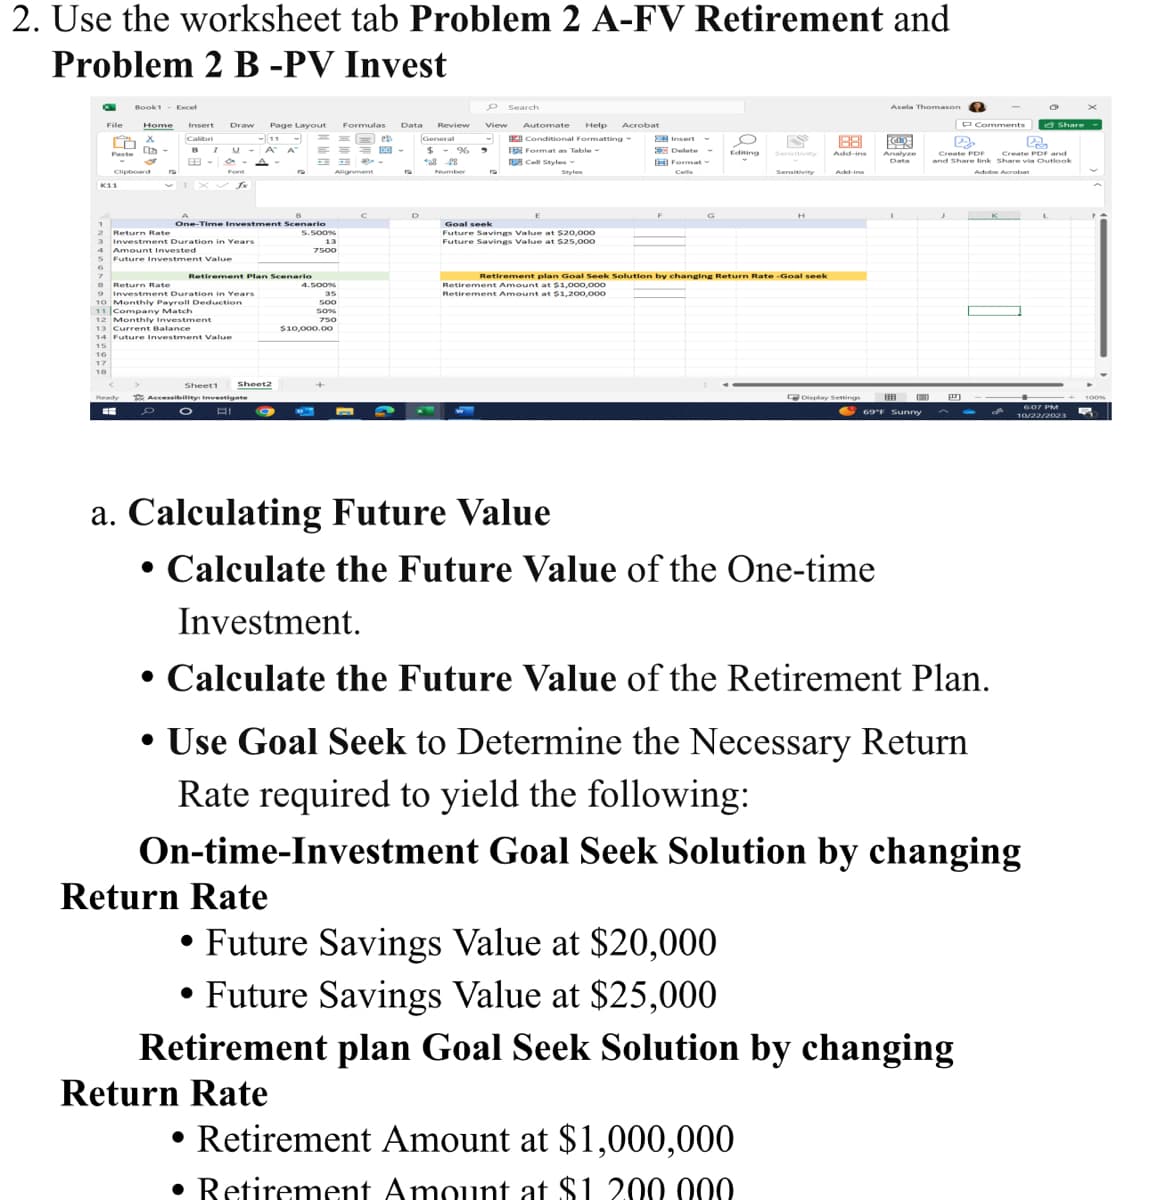 2. Use the worksheet tab Problem 2 A-FV Retirement and
Problem 2 B -PV Invest
K
File
6
7
ñ
Paste
K11
16
17
18
Book1 - Excel
Clipboard
Home Insert
Calibri
X
Dr-
Ready
B I U
89-
Draw Page Layout Formulas Data Review View
== 28
M =100-
Font
2 Return Rate
3 Investment Duration in Years
4 Amount Invested
Future Investment Value
fx
One-Time Investment Scena
Return Rate
9Investment Duration in Years
10 Monthly Payroll Deduction
11 Company Match
12 Monthly Investment
13 Current Balance
14 Future Investment Value
15
Sheet1
11
A A
A-
Retirement Plan Scenario
Sheet2
Accessibility: Investigate
D O AI
19
9
Return Rate
=
5.500%
13
7500
Alignment
4.500%
35
500
50%
750
$10,000.00
19
D
O Search
General
-
$ % 9
68 28
Number
Automate Help Acrobat
Conditional Formatting
W
Format as Table
Cell Styles -
Styles
Goal seek
Future Savings Value at $20,000
Future Savings Value at $25,000
Insert
Delete
Format -
Cells
G
O
dating
FS
Sensitivity
Retirement plan Goal Seek Solution by changing Return Rate-Goal seek
Retirement Amount at $1,000,000
Retirement Amount at $1,200,000
• Retirement Amount at $1,000,000
• Retirement Amount at $1. 200.000
H
1881
Add-ins
Add-ins
Display Settings
Asela Thomason
KCLD
Analyze
Data
69°F Sunny
P Comments
• Future Savings Value at $20,000
• Future Savings Value at $25,000
Retirement plan Goal Seek Solution by changing
Return Rate
D
PR
Create PDF
Create PDF and
and Share link Share via Outlook
Adobe Acrobat
a. Calculating Future Value
• Calculate the Future Value of the One-time
Investment.
• Calculate the Future Value of the Retirement Plan.
• Use Goal Seek to Determine the Necessary Return
Rate required to yield the following:
On-time-Investment Goal Seek Solution by changing
S
Share
6:07 PM
10/22/2023
100%
5